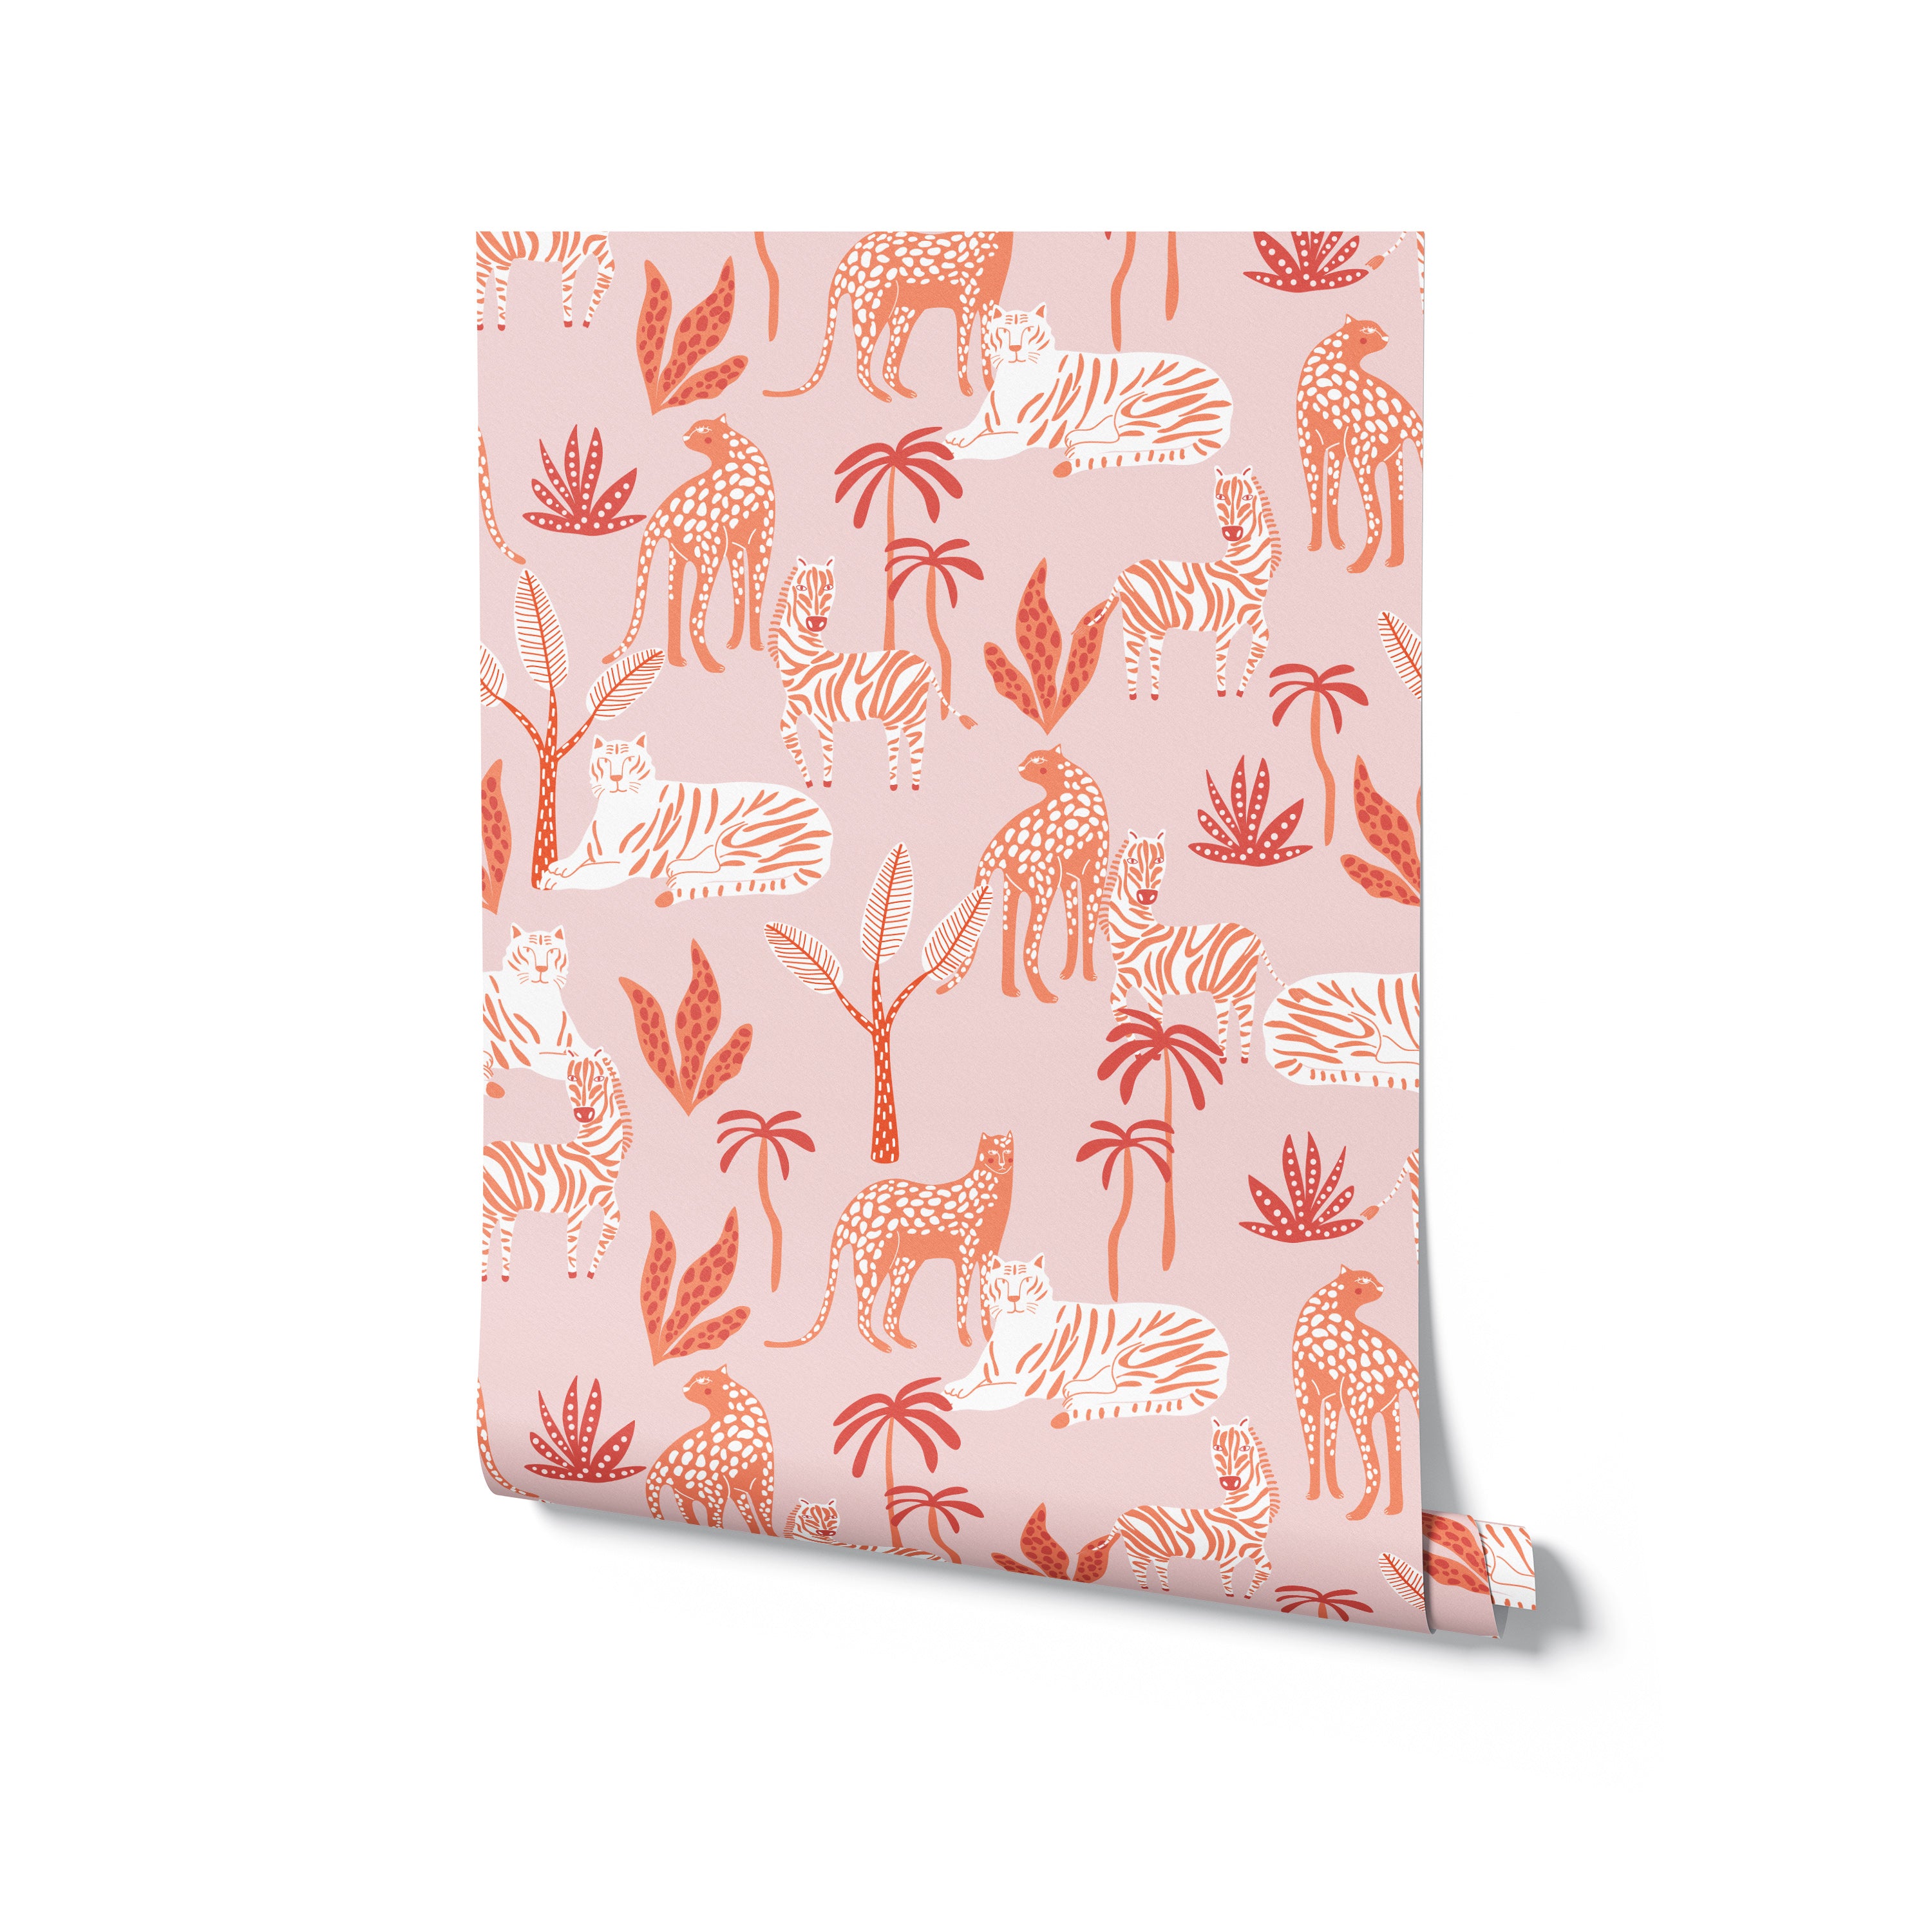 A single roll of Sunset Safari wallpaper unrolled to display its lively pattern of safari animals and tropical plants in orange, coral, and white on a pink background.